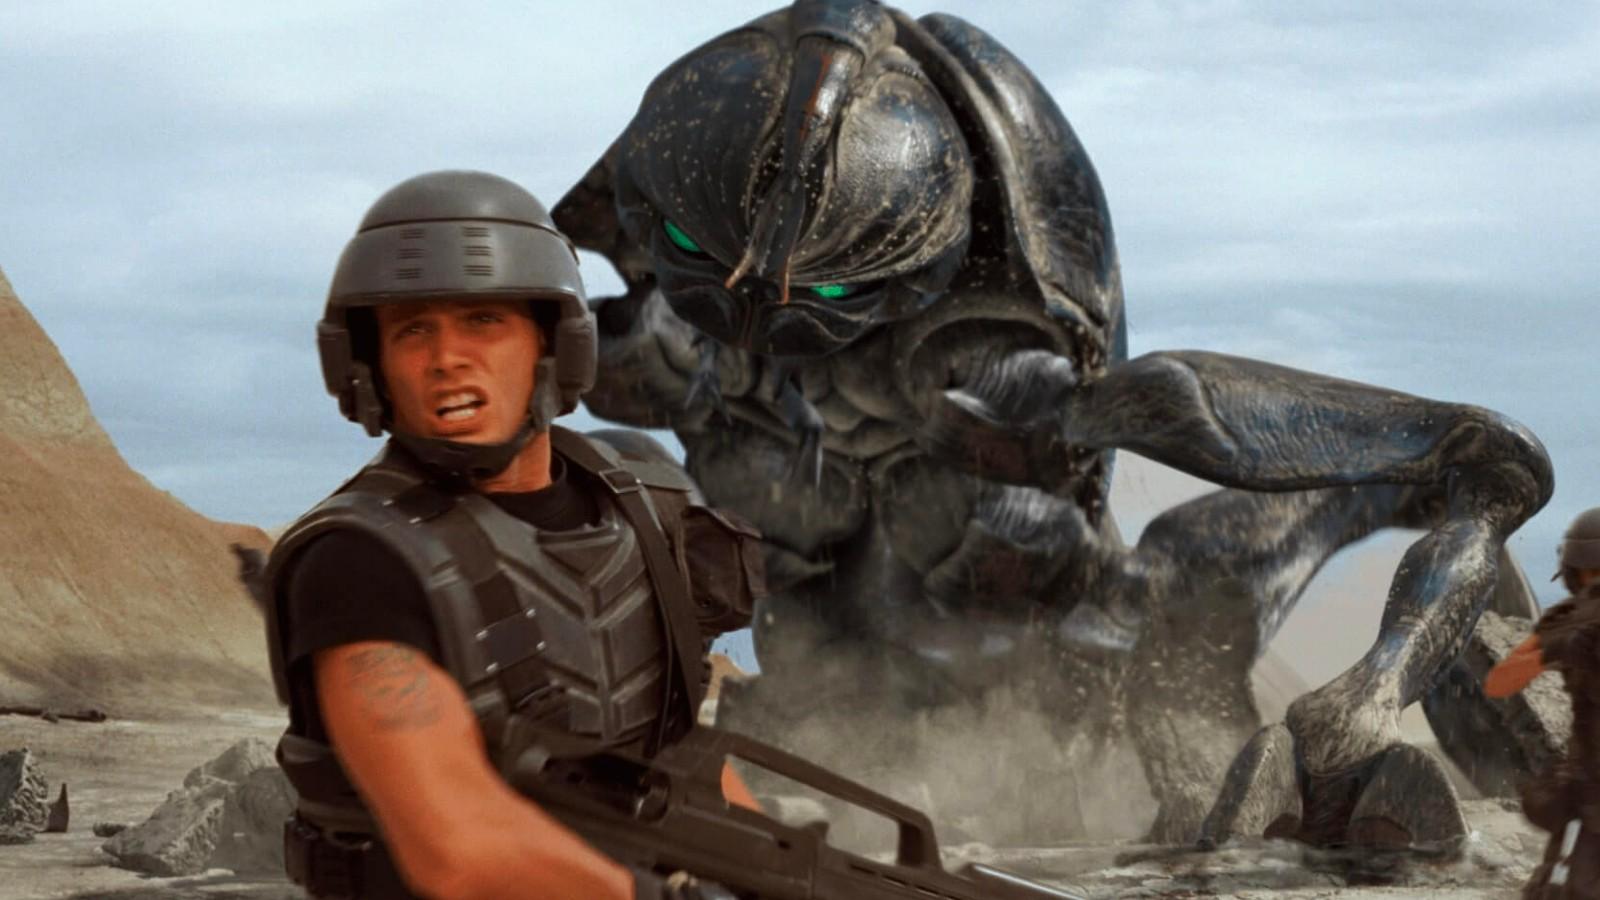 A still from Starship Troopers